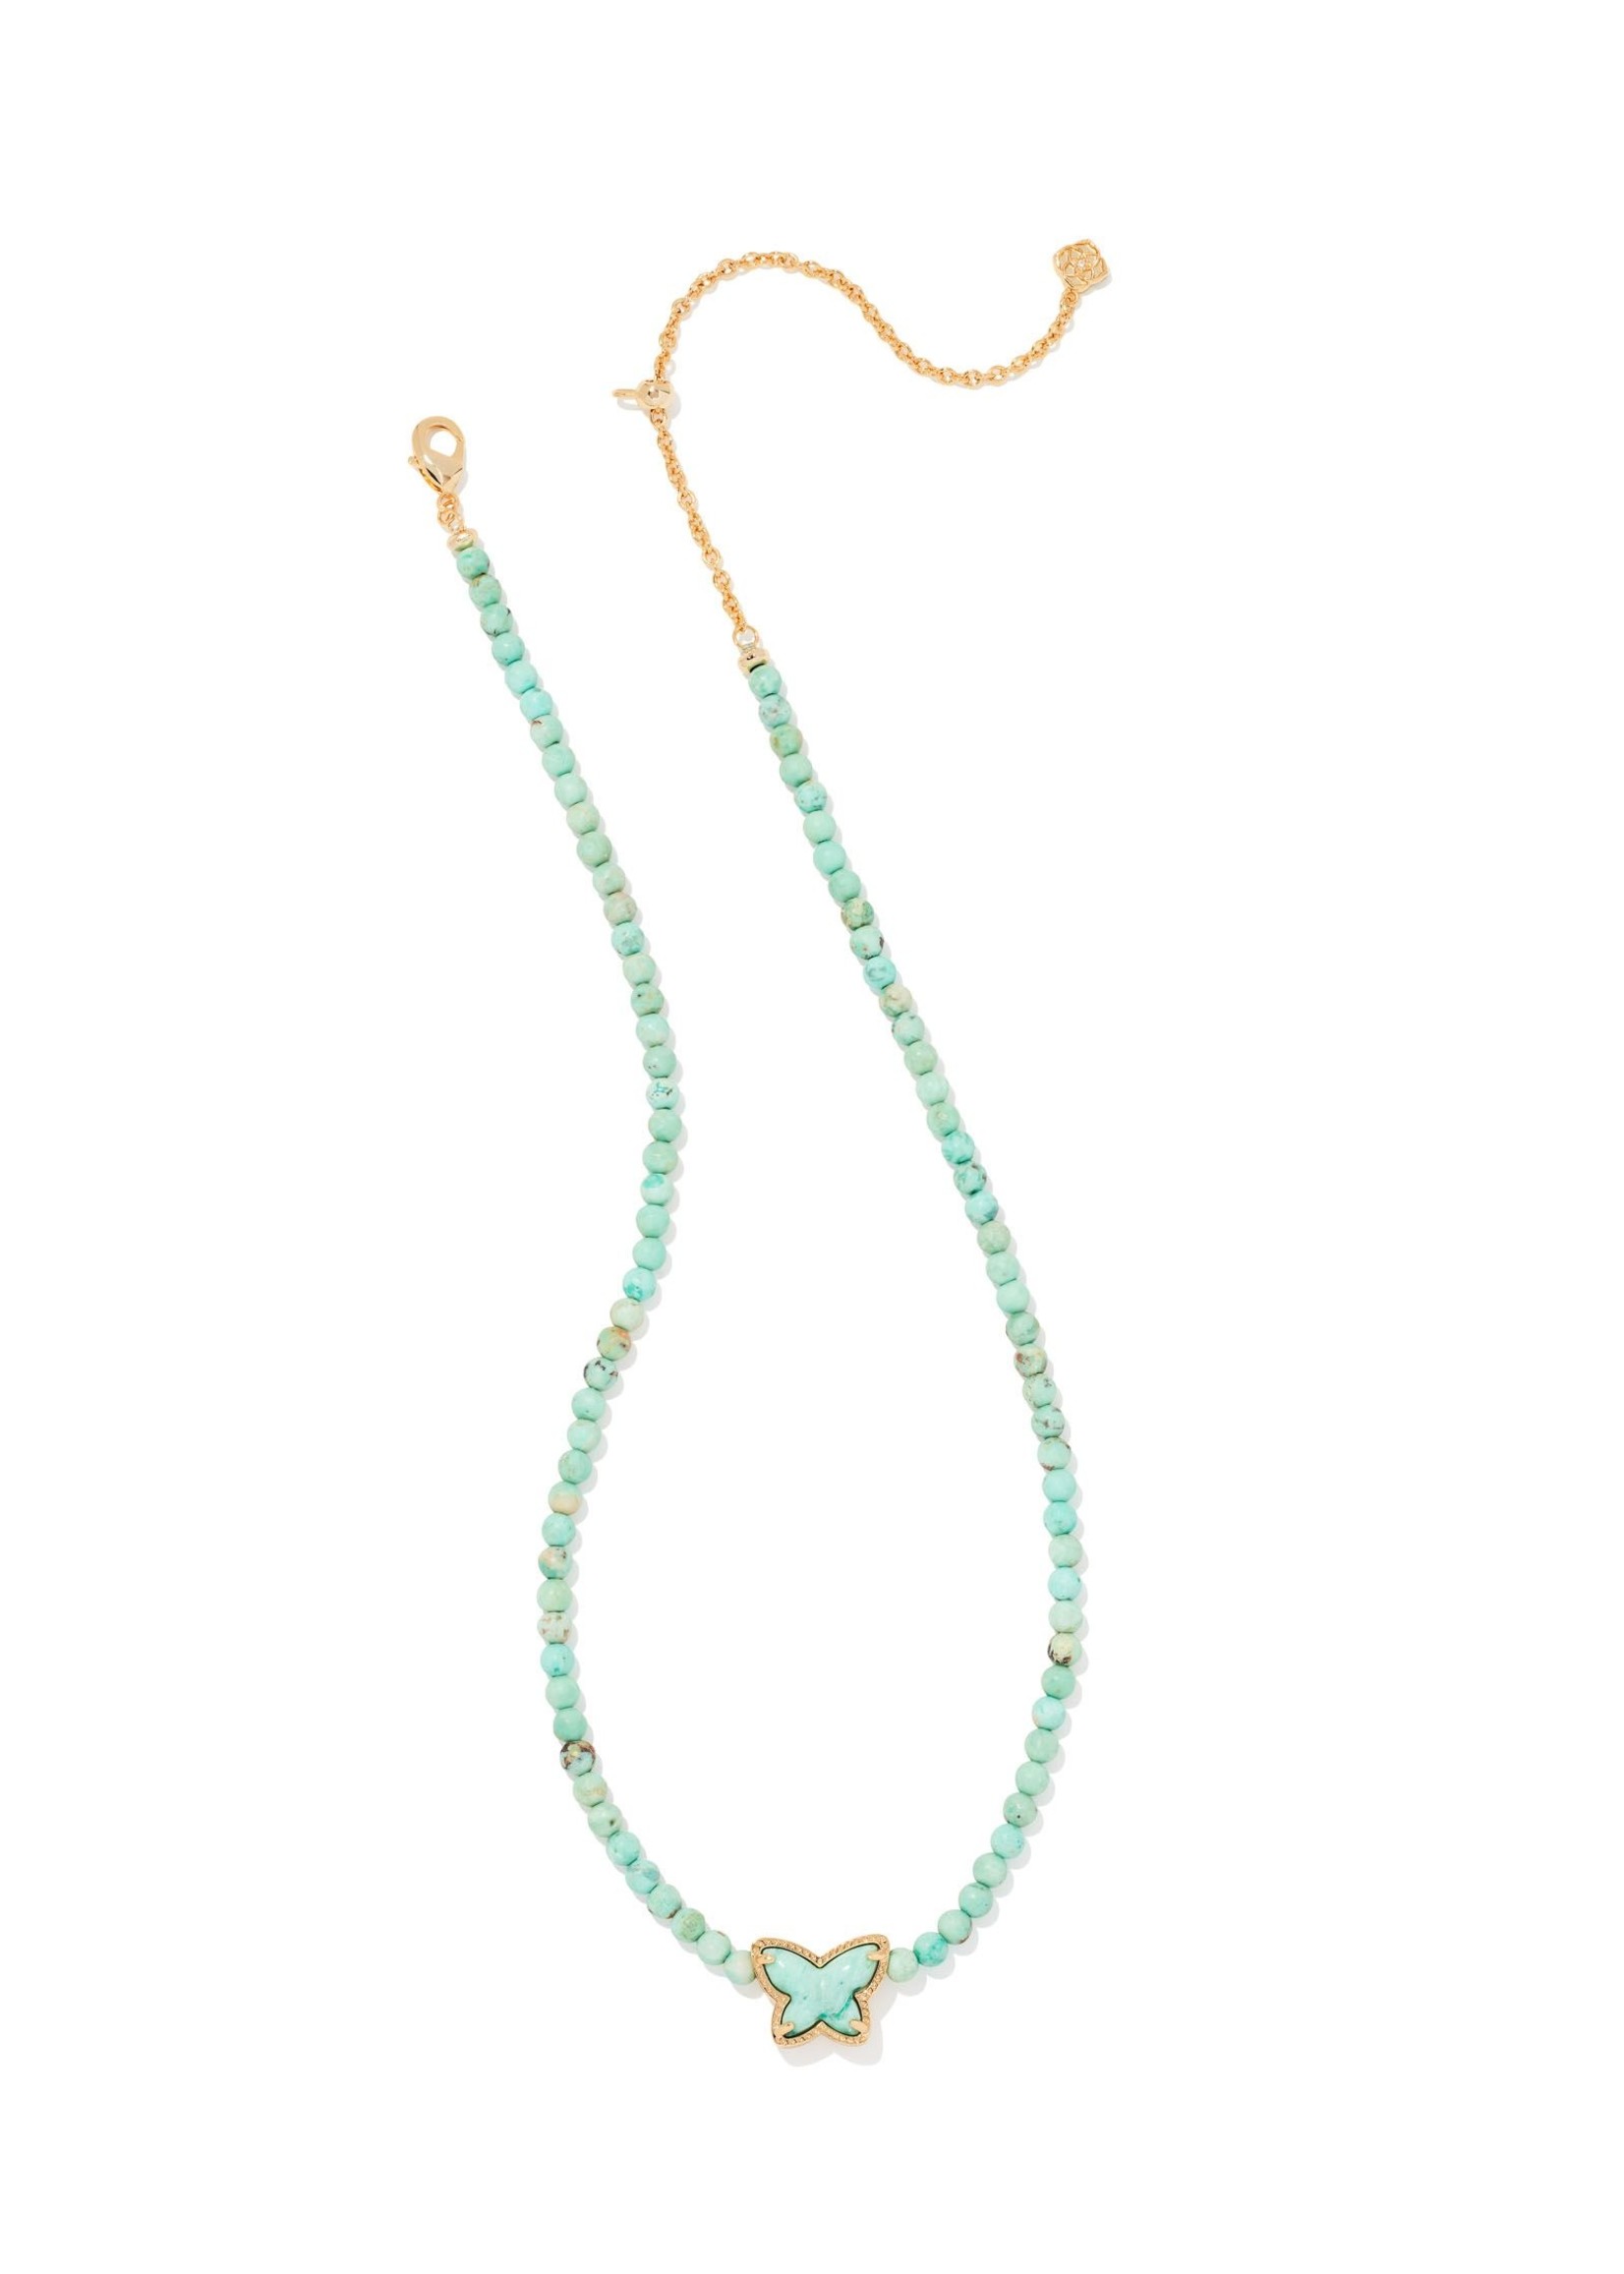 The Beaded Lillia Gold Necklace